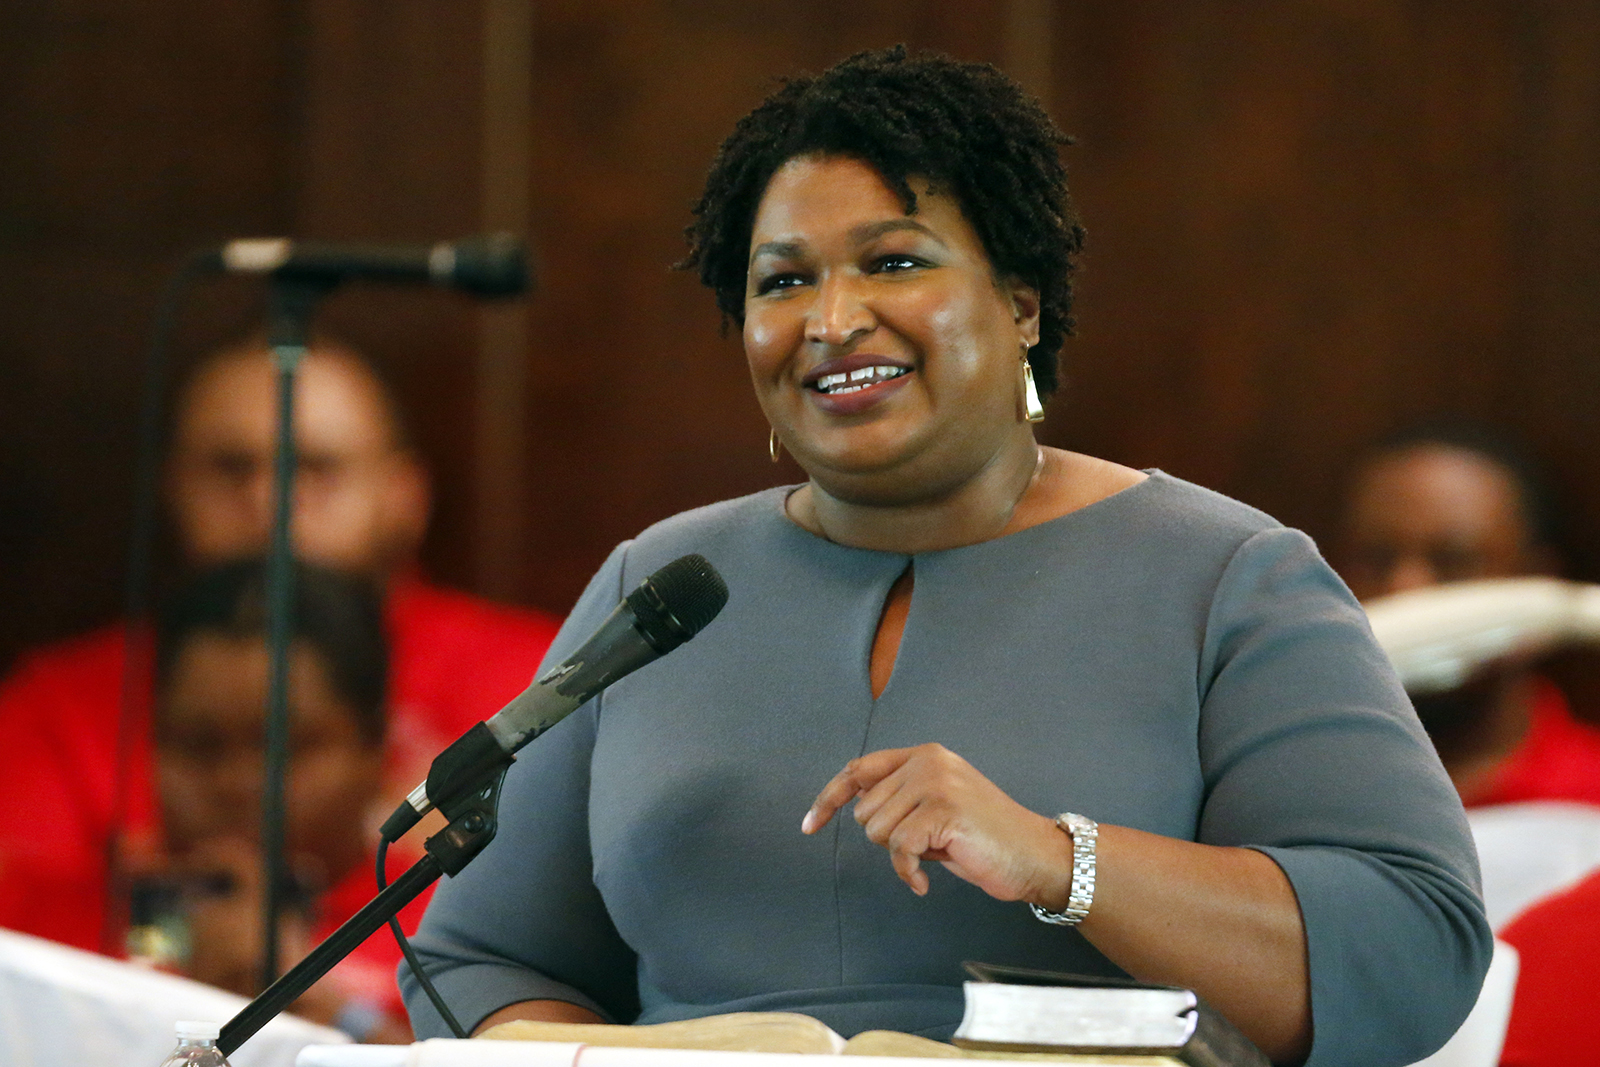 Former gubernatorial candidate and former state Rep. Stacey Abrams speaks to the congregation at Brown Chapel AME Church in Selma , Alabama, on March 1, 2020. (AP Photo/Butch Dill, File)